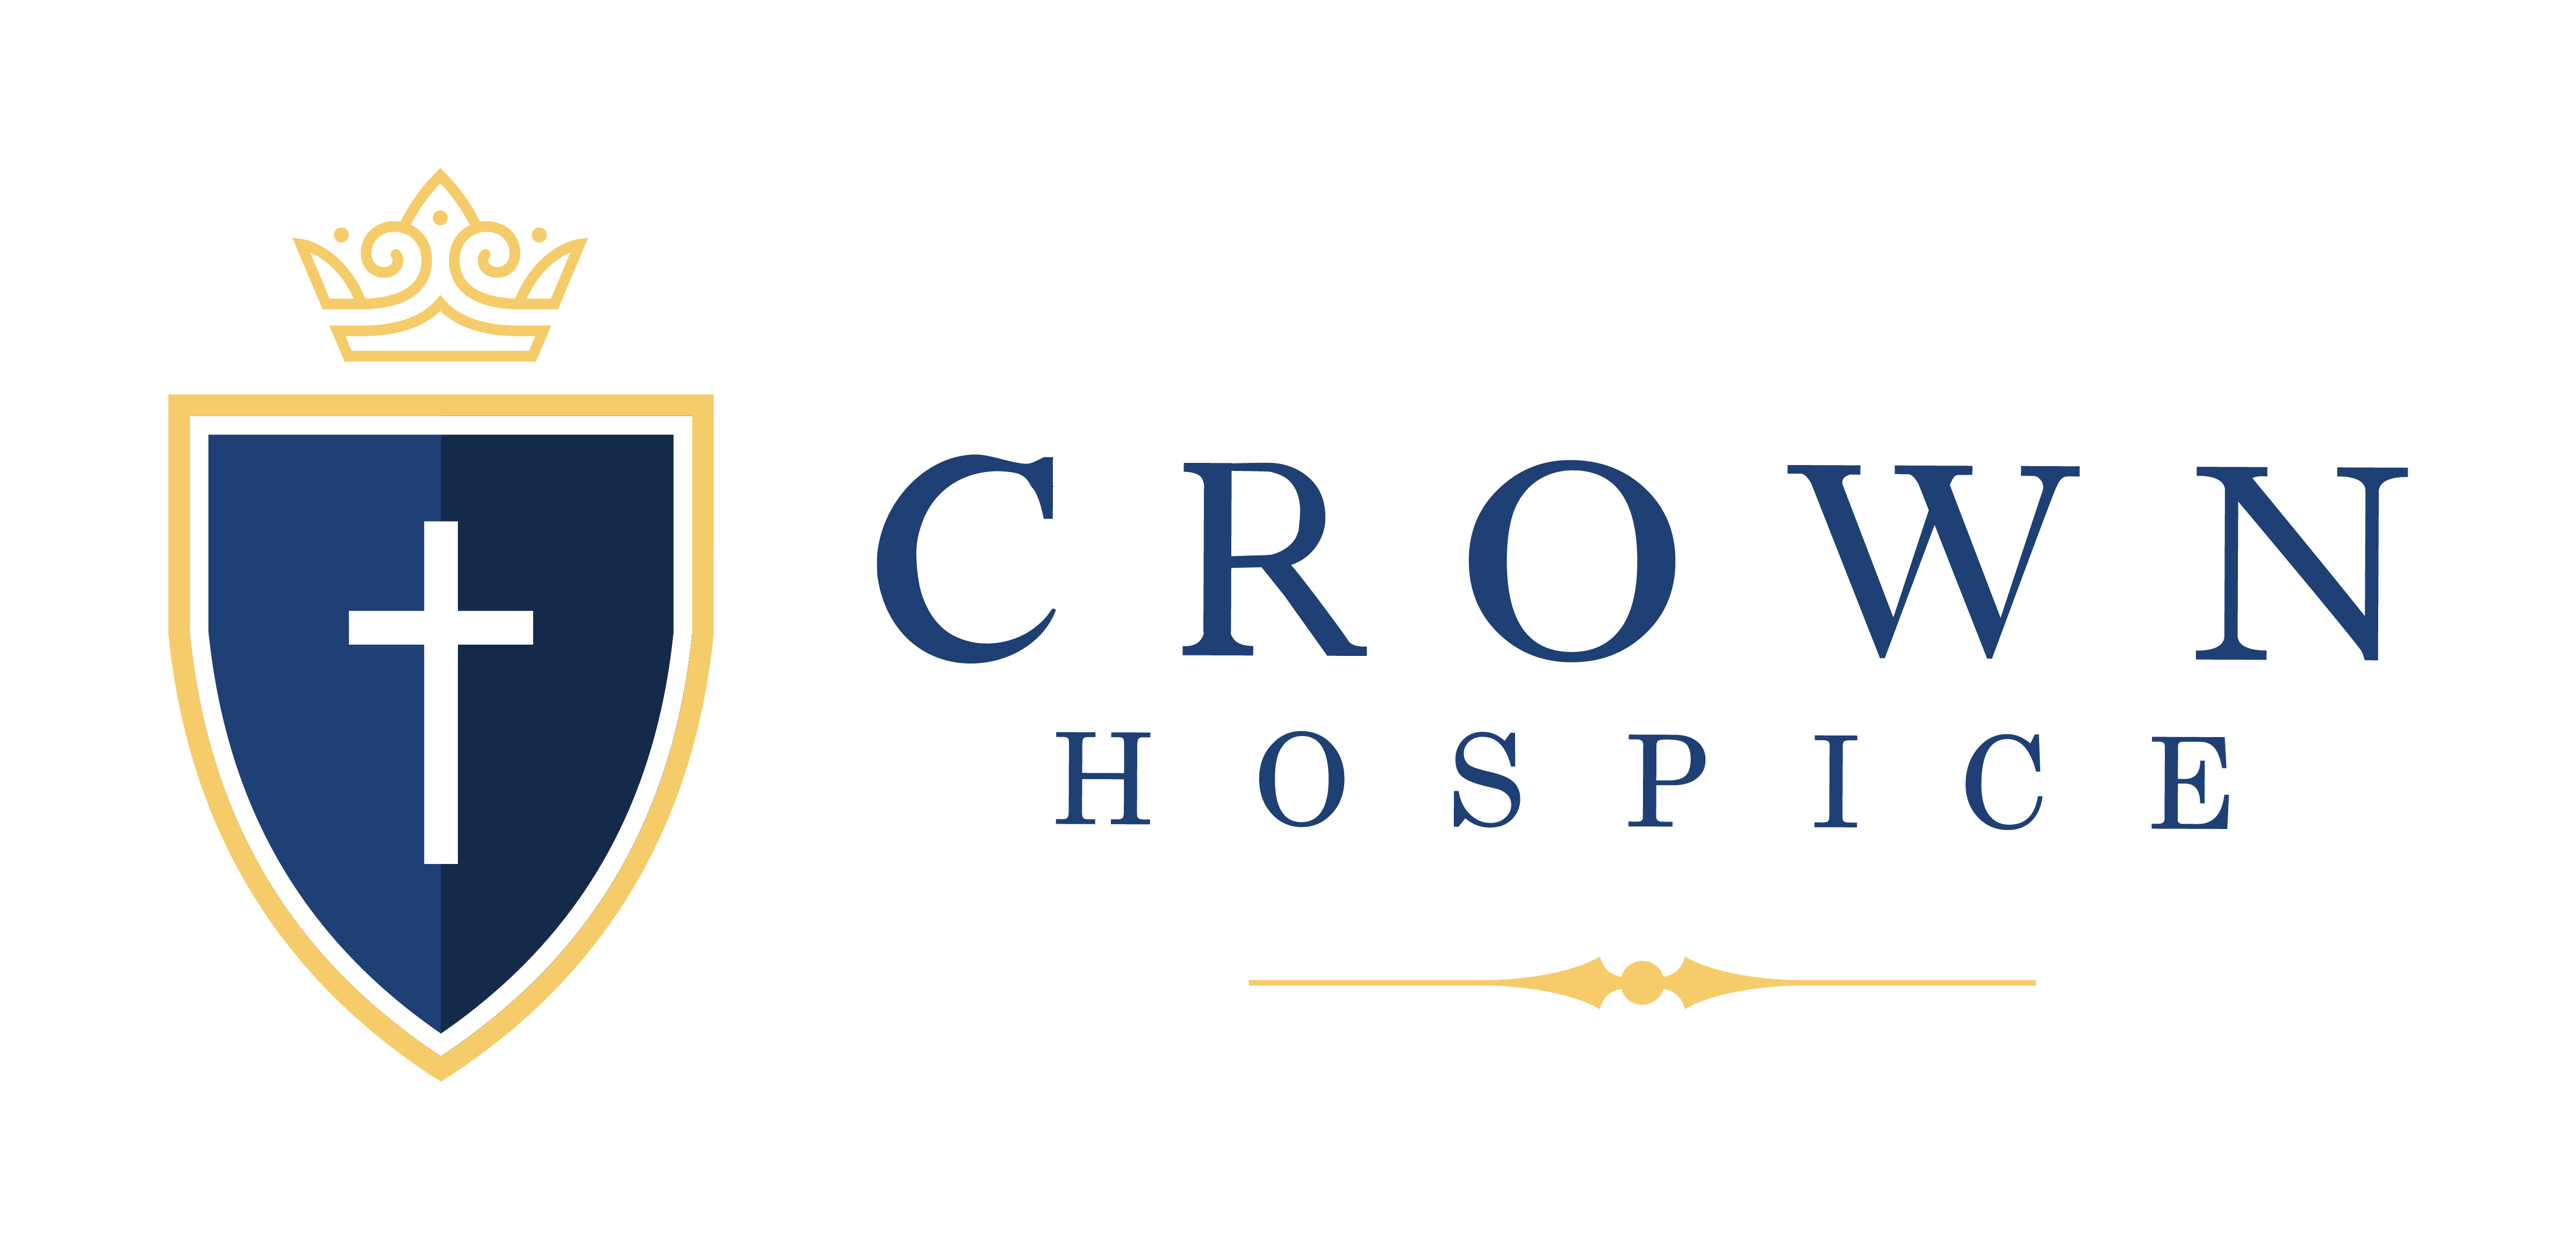 F. Crown Hospice (Bronce)